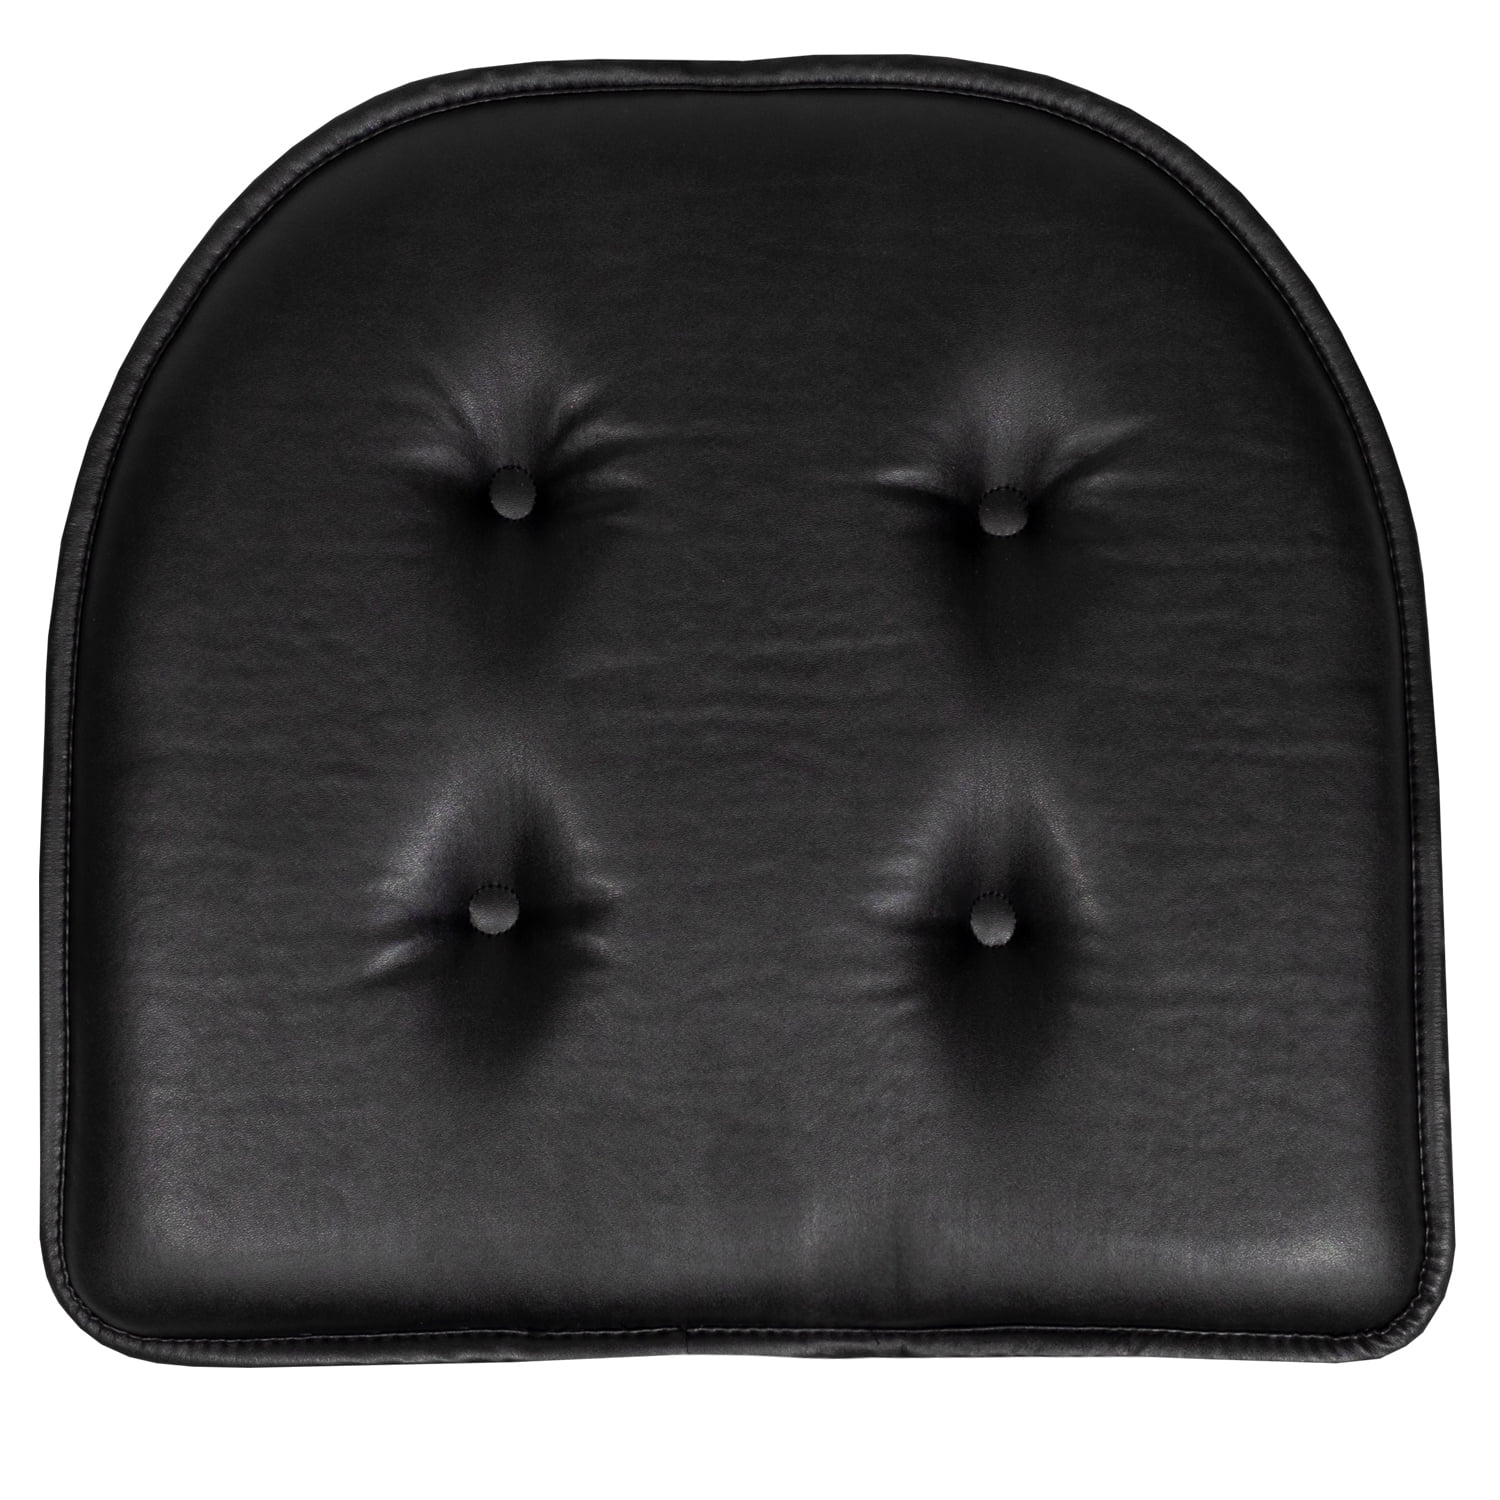 Black 16-inch Memory Foam Chair Pad/Seat Cushion with Non-Slip Backing (2  or 4 Pack) - On Sale - Bed Bath & Beyond - 10858136